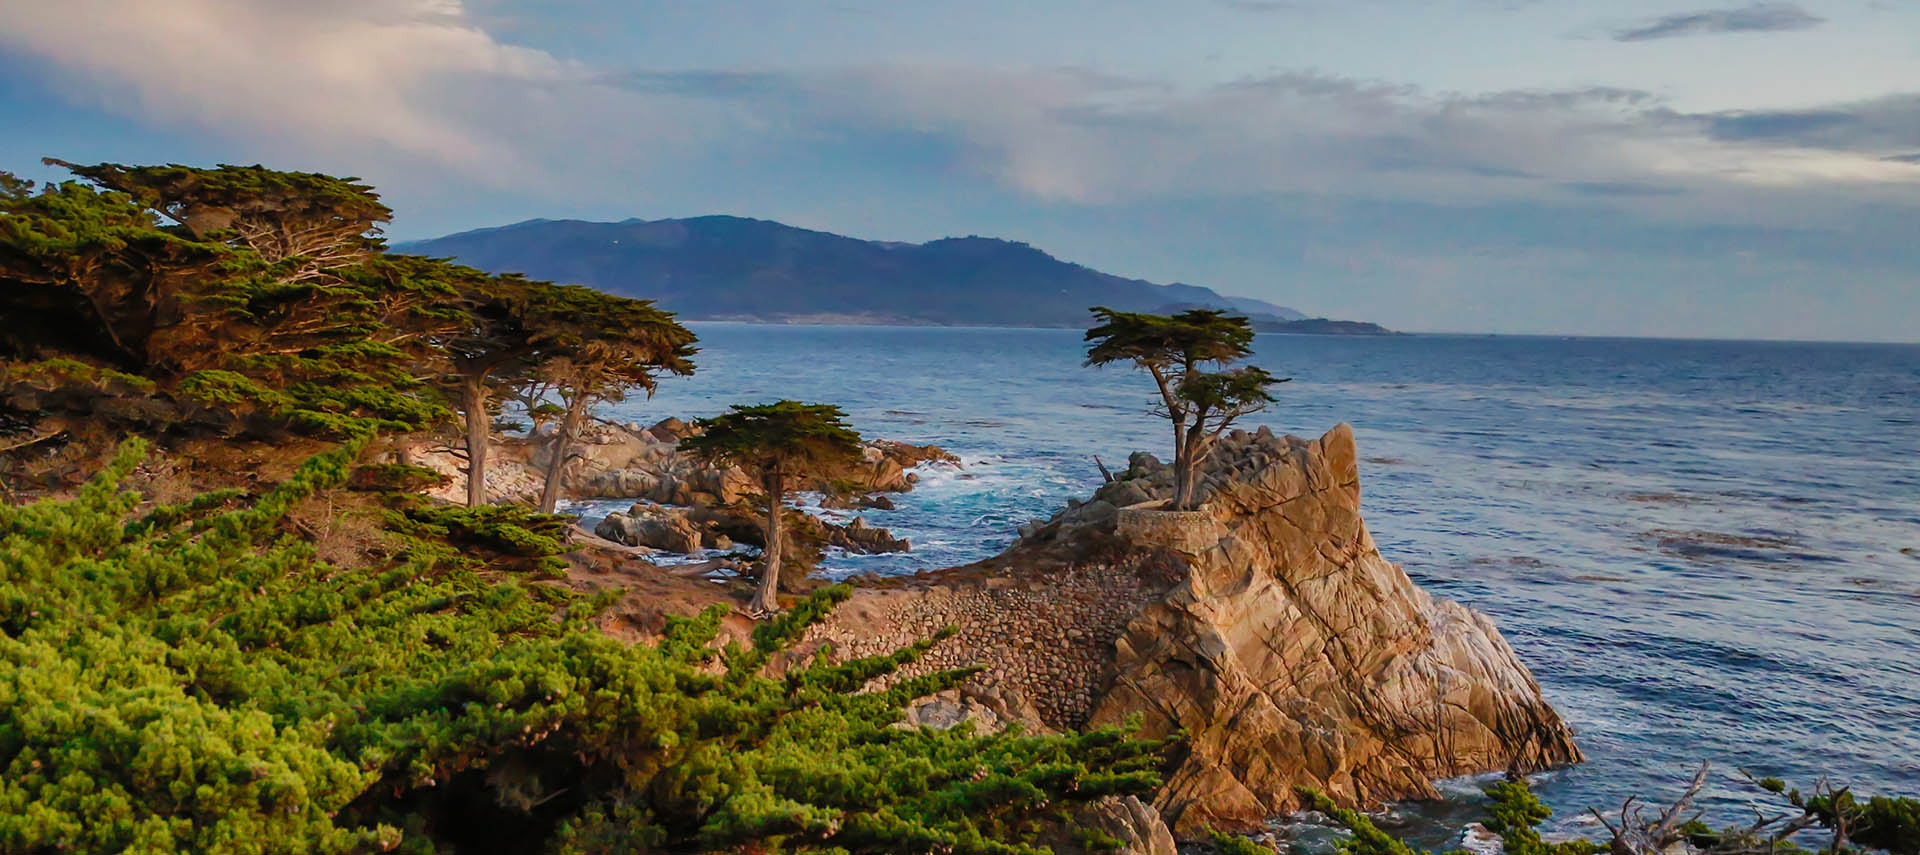 Lone cypress tree on the coast, ocean meets cliff.